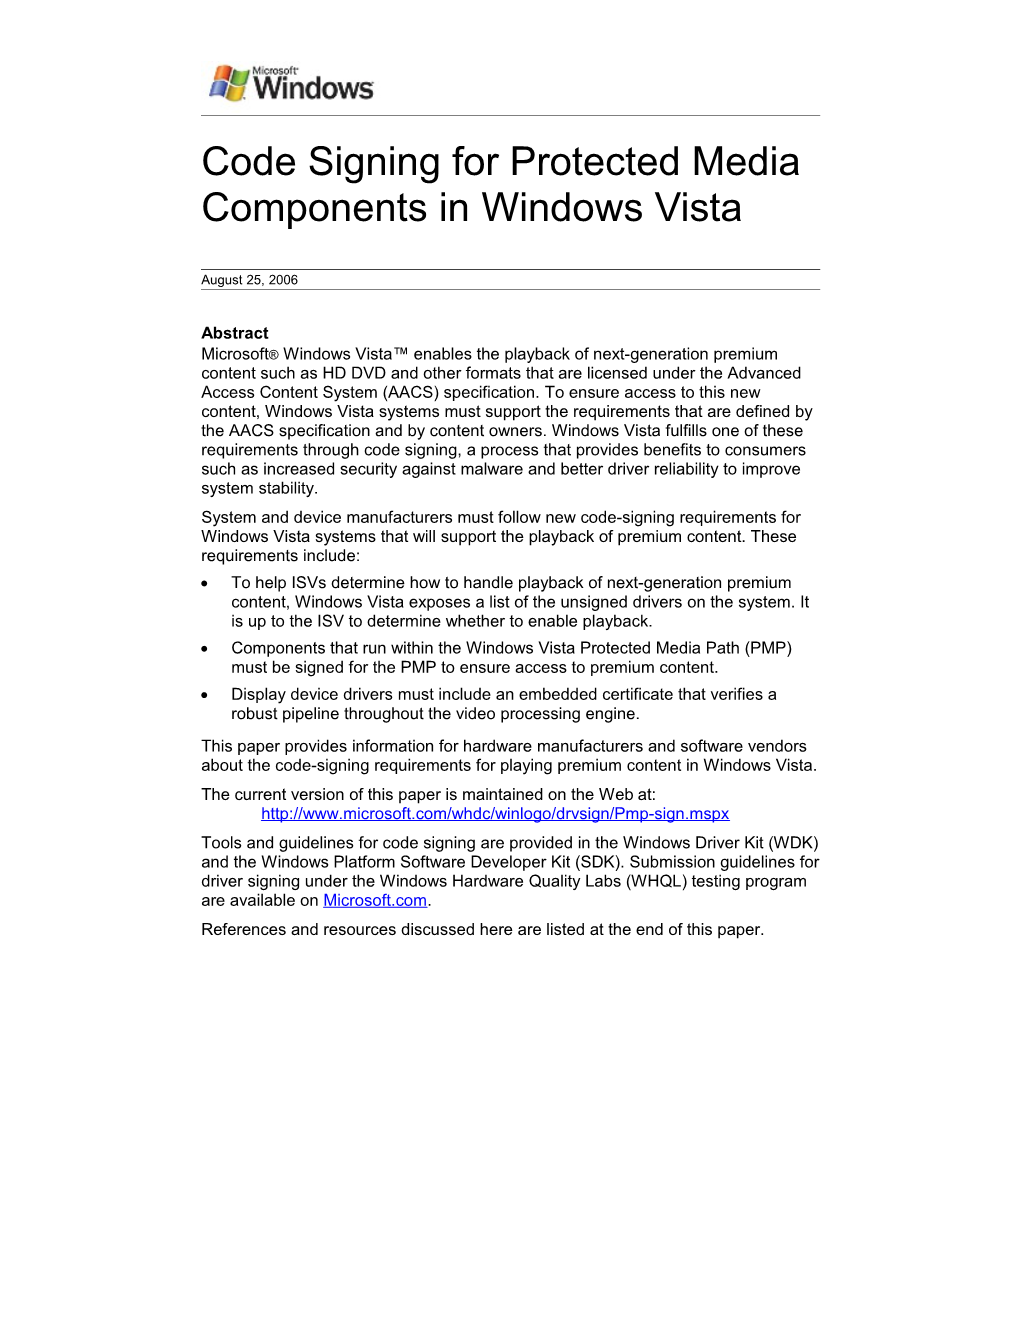 Code Signing For Protected Media Components In Windows Vista